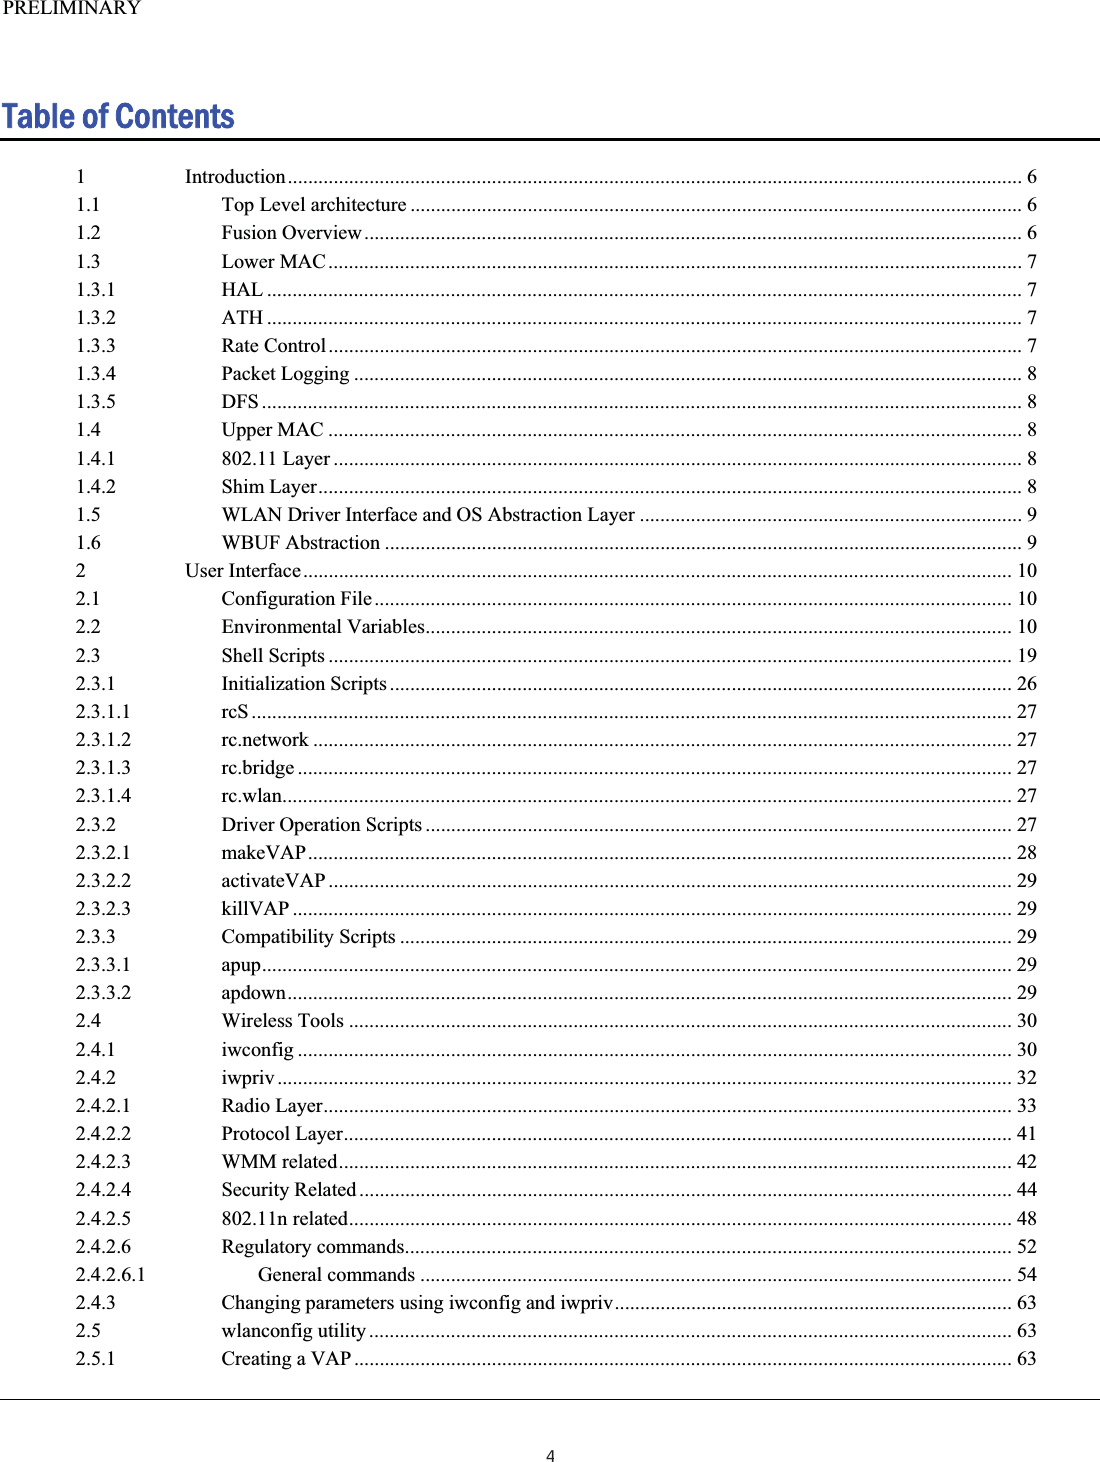 PRELIMINARY  Table of Contents 1 Introduction................................................................................................................................................ 61.1 Top Level architecture ........................................................................................................................ 61.2 Fusion Overview................................................................................................................................. 61.3 Lower MAC........................................................................................................................................ 71.3.1 HAL .................................................................................................................................................... 71.3.2 ATH .................................................................................................................................................... 71.3.3 Rate Control........................................................................................................................................ 71.3.4 Packet Logging ................................................................................................................................... 81.3.5 DFS ..................................................................................................................................................... 81.4 Upper MAC ........................................................................................................................................ 81.4.1 802.11 Layer ....................................................................................................................................... 81.4.2 Shim Layer.......................................................................................................................................... 81.5 WLAN Driver Interface and OS Abstraction Layer ........................................................................... 91.6 WBUF Abstraction ............................................................................................................................. 92 User Interface........................................................................................................................................... 102.1 Configuration File............................................................................................................................. 102.2 Environmental Variables................................................................................................................... 102.3 Shell Scripts ...................................................................................................................................... 192.3.1 Initialization Scripts .......................................................................................................................... 262.3.1.1 rcS ..................................................................................................................................................... 272.3.1.2 rc.network ......................................................................................................................................... 272.3.1.3 rc.bridge ............................................................................................................................................ 272.3.1.4 rc.wlan............................................................................................................................................... 272.3.2 Driver Operation Scripts ................................................................................................................... 272.3.2.1 makeVAP.......................................................................................................................................... 282.3.2.2 activateVAP ...................................................................................................................................... 292.3.2.3 killVAP ............................................................................................................................................. 292.3.3 Compatibility Scripts ........................................................................................................................ 292.3.3.1 apup................................................................................................................................................... 292.3.3.2 apdown.............................................................................................................................................. 292.4 Wireless Tools .................................................................................................................................. 302.4.1 iwconfig ............................................................................................................................................ 302.4.2 iwpriv ................................................................................................................................................ 322.4.2.1 Radio Layer....................................................................................................................................... 332.4.2.2 Protocol Layer................................................................................................................................... 412.4.2.3 WMM related.................................................................................................................................... 422.4.2.4 Security Related ................................................................................................................................ 442.4.2.5 802.11n related.................................................................................................................................. 482.4.2.6 Regulatory commands....................................................................................................................... 522.4.2.6.1 General commands .................................................................................................................... 542.4.3 Changing parameters using iwconfig and iwpriv..............................................................................632.5 wlanconfig utility .............................................................................................................................. 632.5.1 Creating a VAP ................................................................................................................................. 634